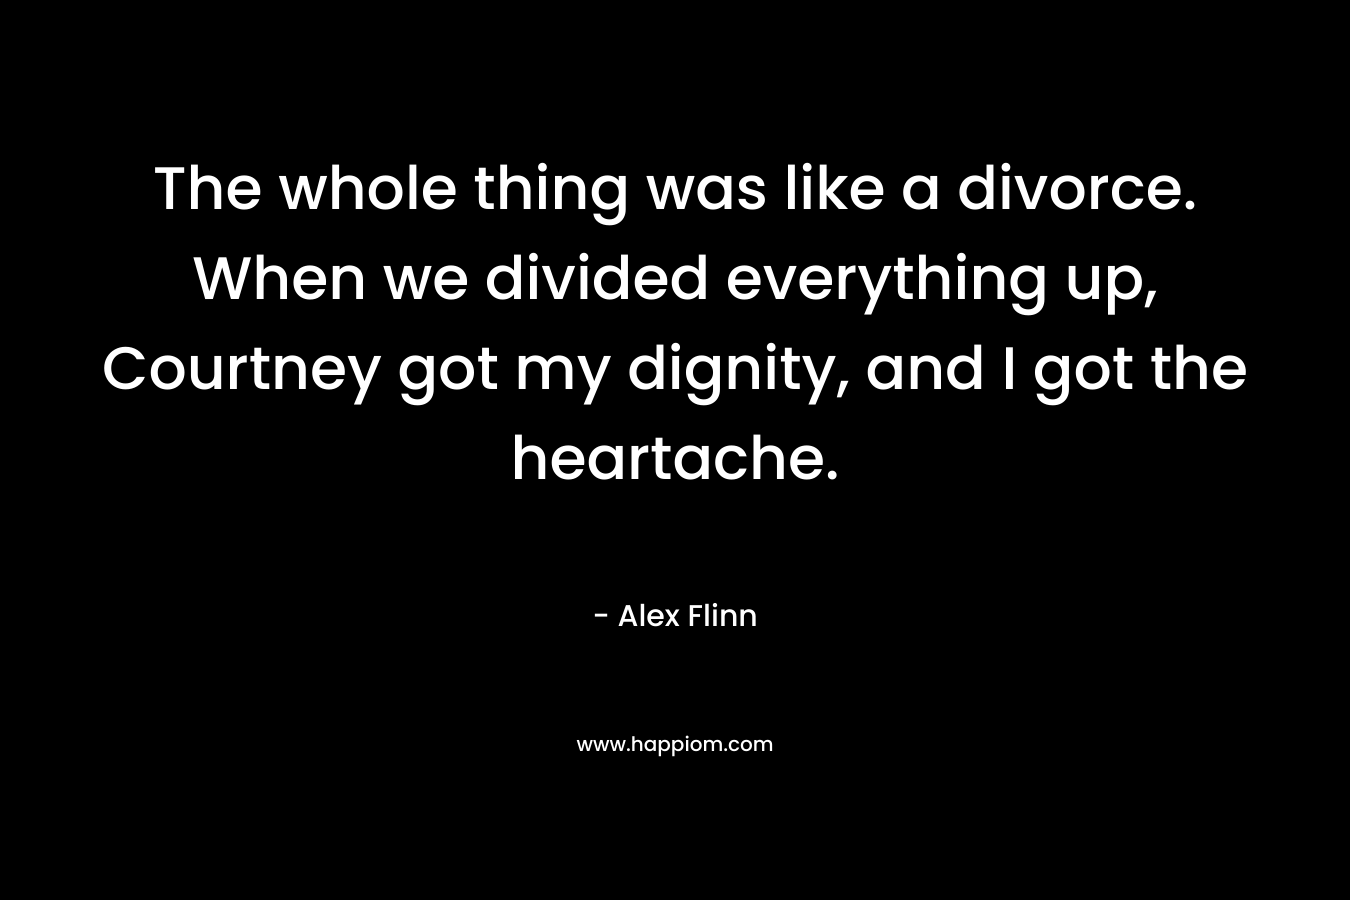 The whole thing was like a divorce. When we divided everything up, Courtney got my dignity, and I got the heartache. – Alex Flinn